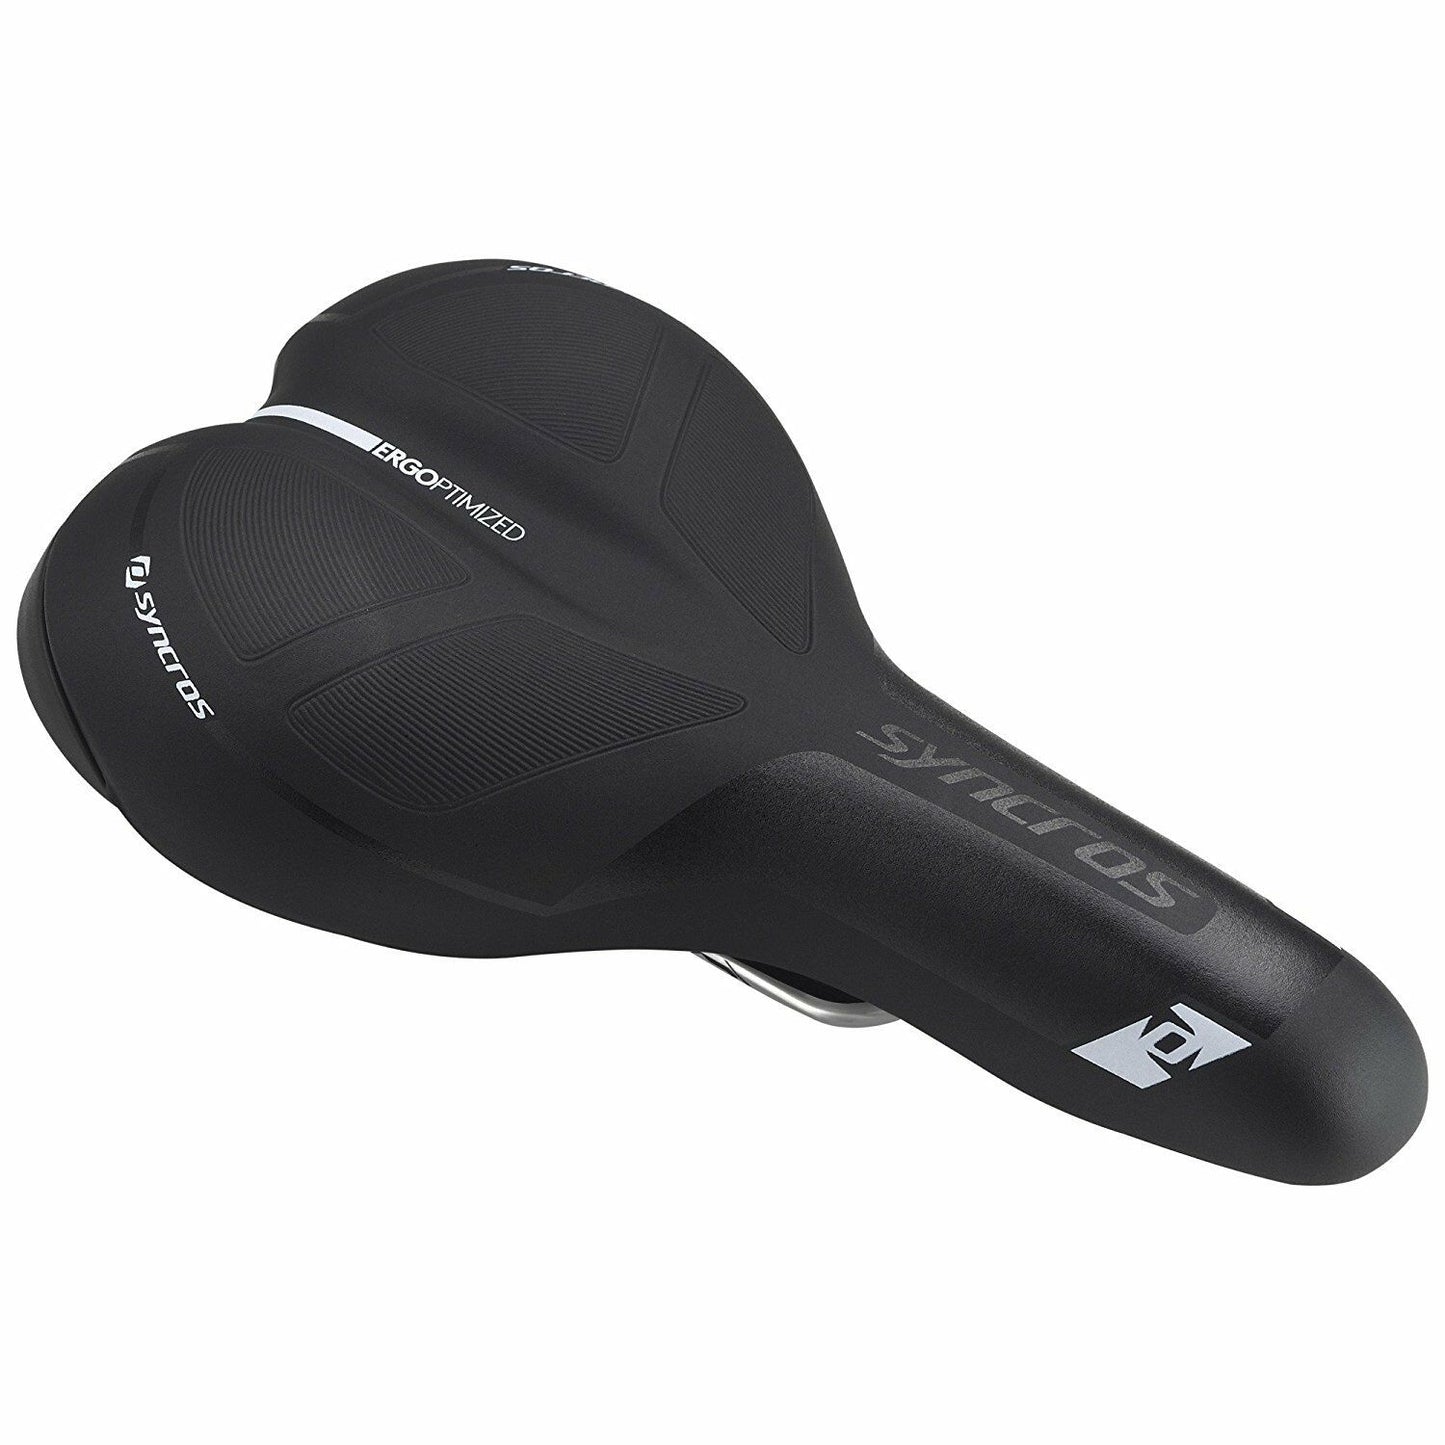 Syncros Commuter 1.5 Gel Womens Saddle 250mm x 170mm Microtex/Nylon/Gel/Steel Black/White - charged-ebikes